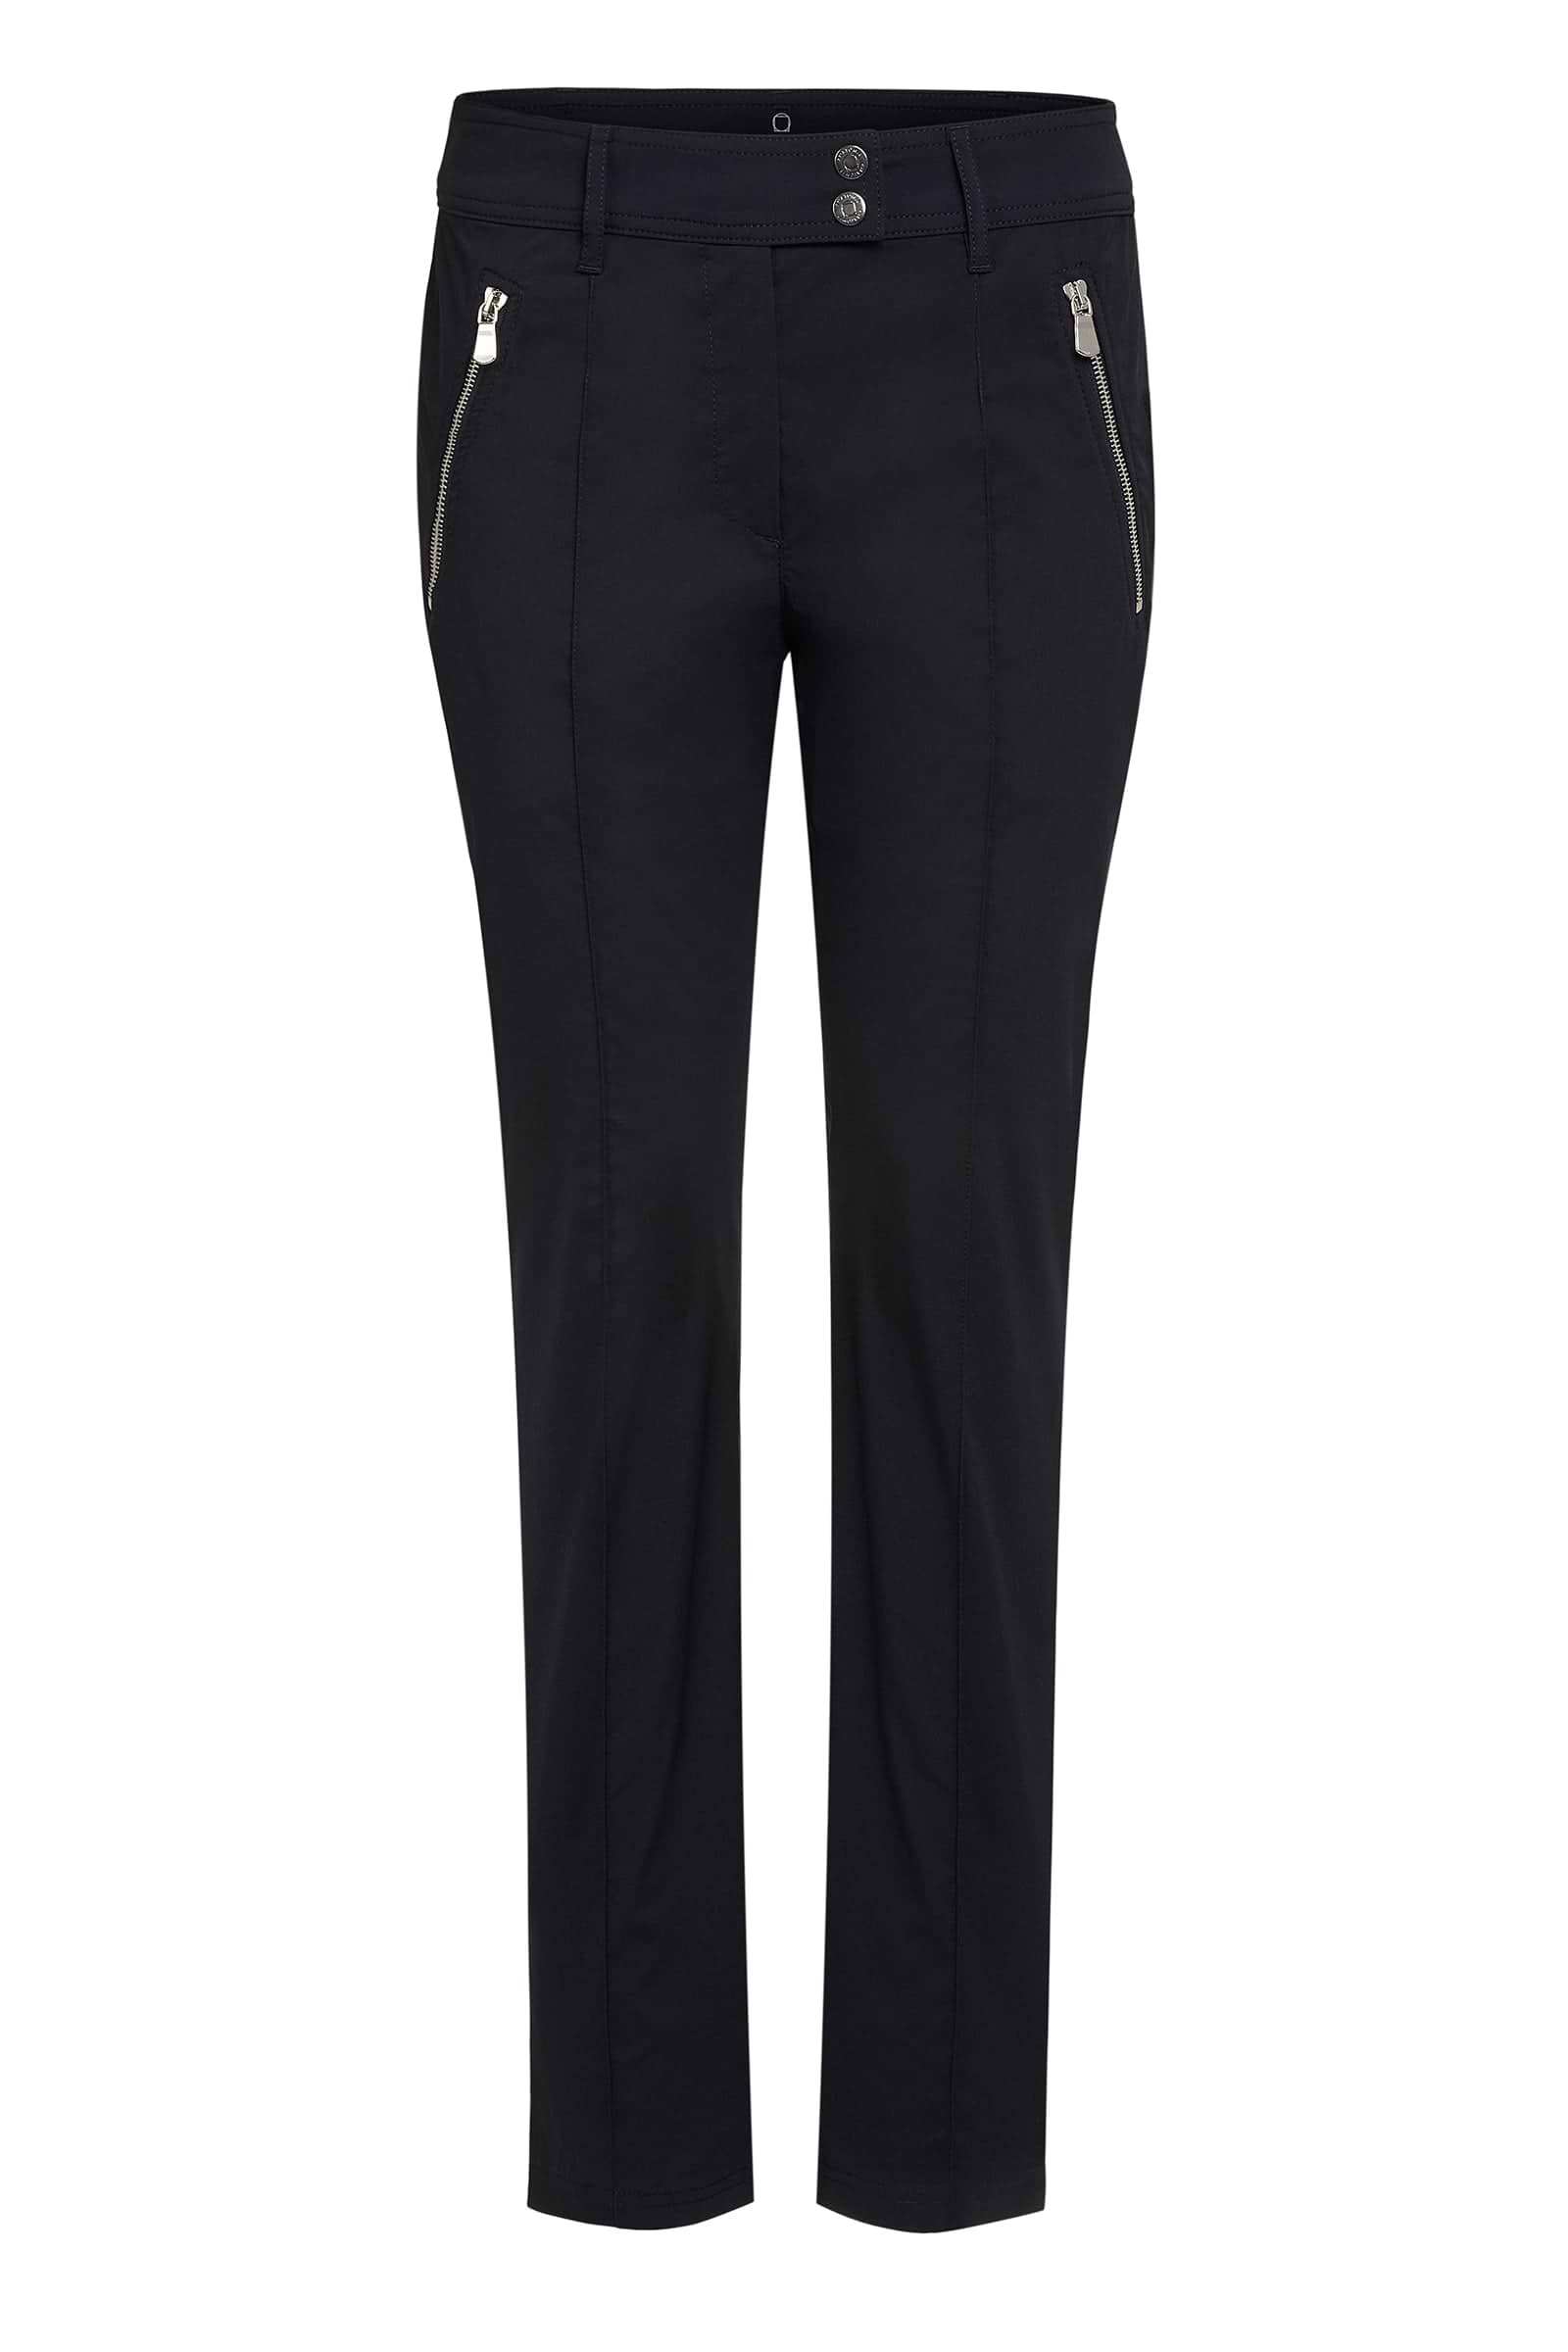 The Best Travel Pants. Flat Lay of the Peggy Zippered Pant in Black